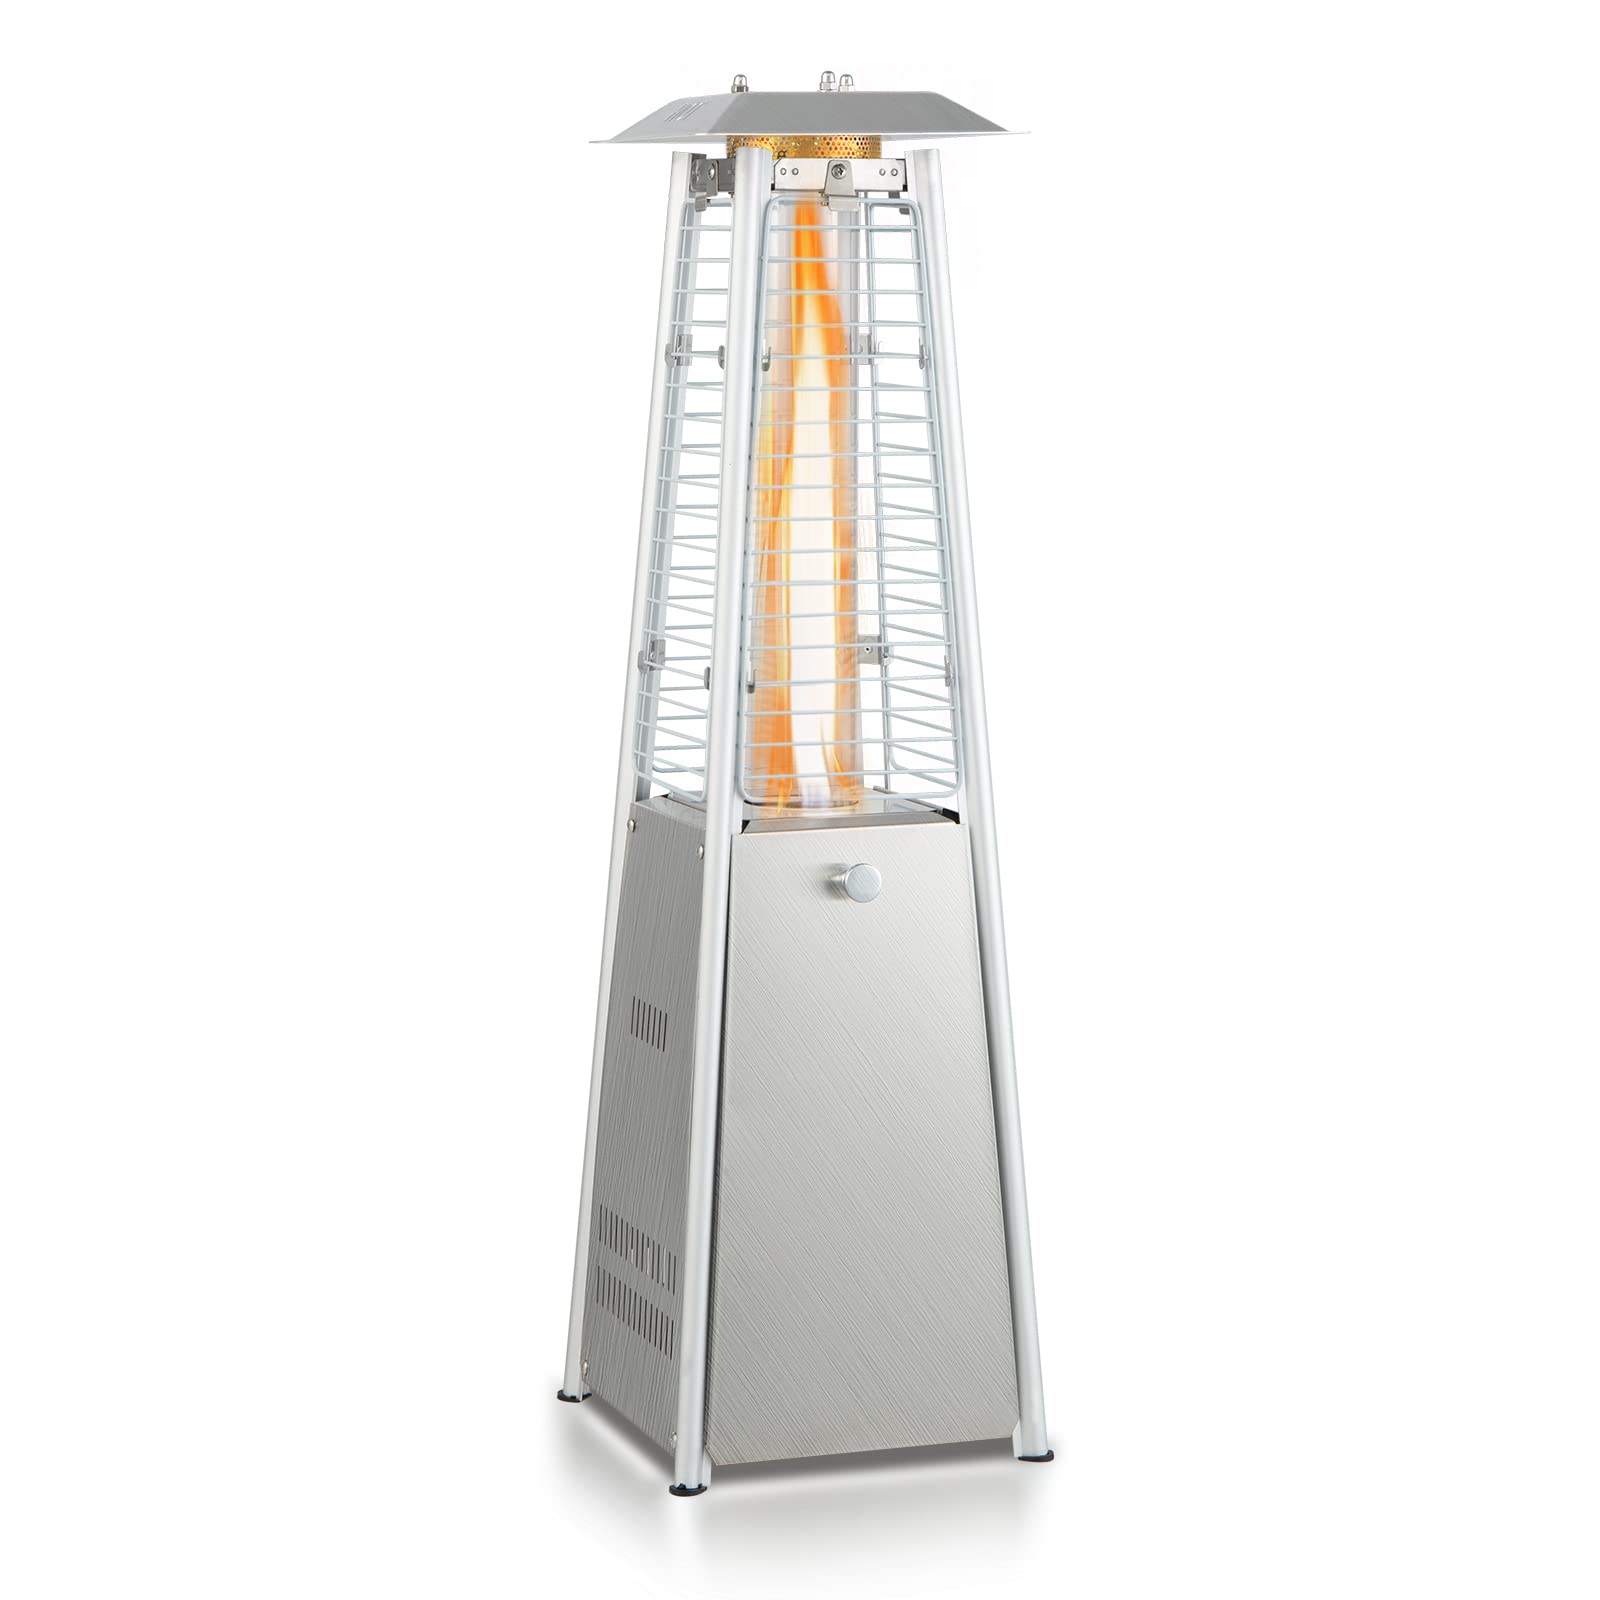 Giantex Outdoor Heaters for Patio - 35" Outside Portable Tabletop Patio Heater, 9500 BTU